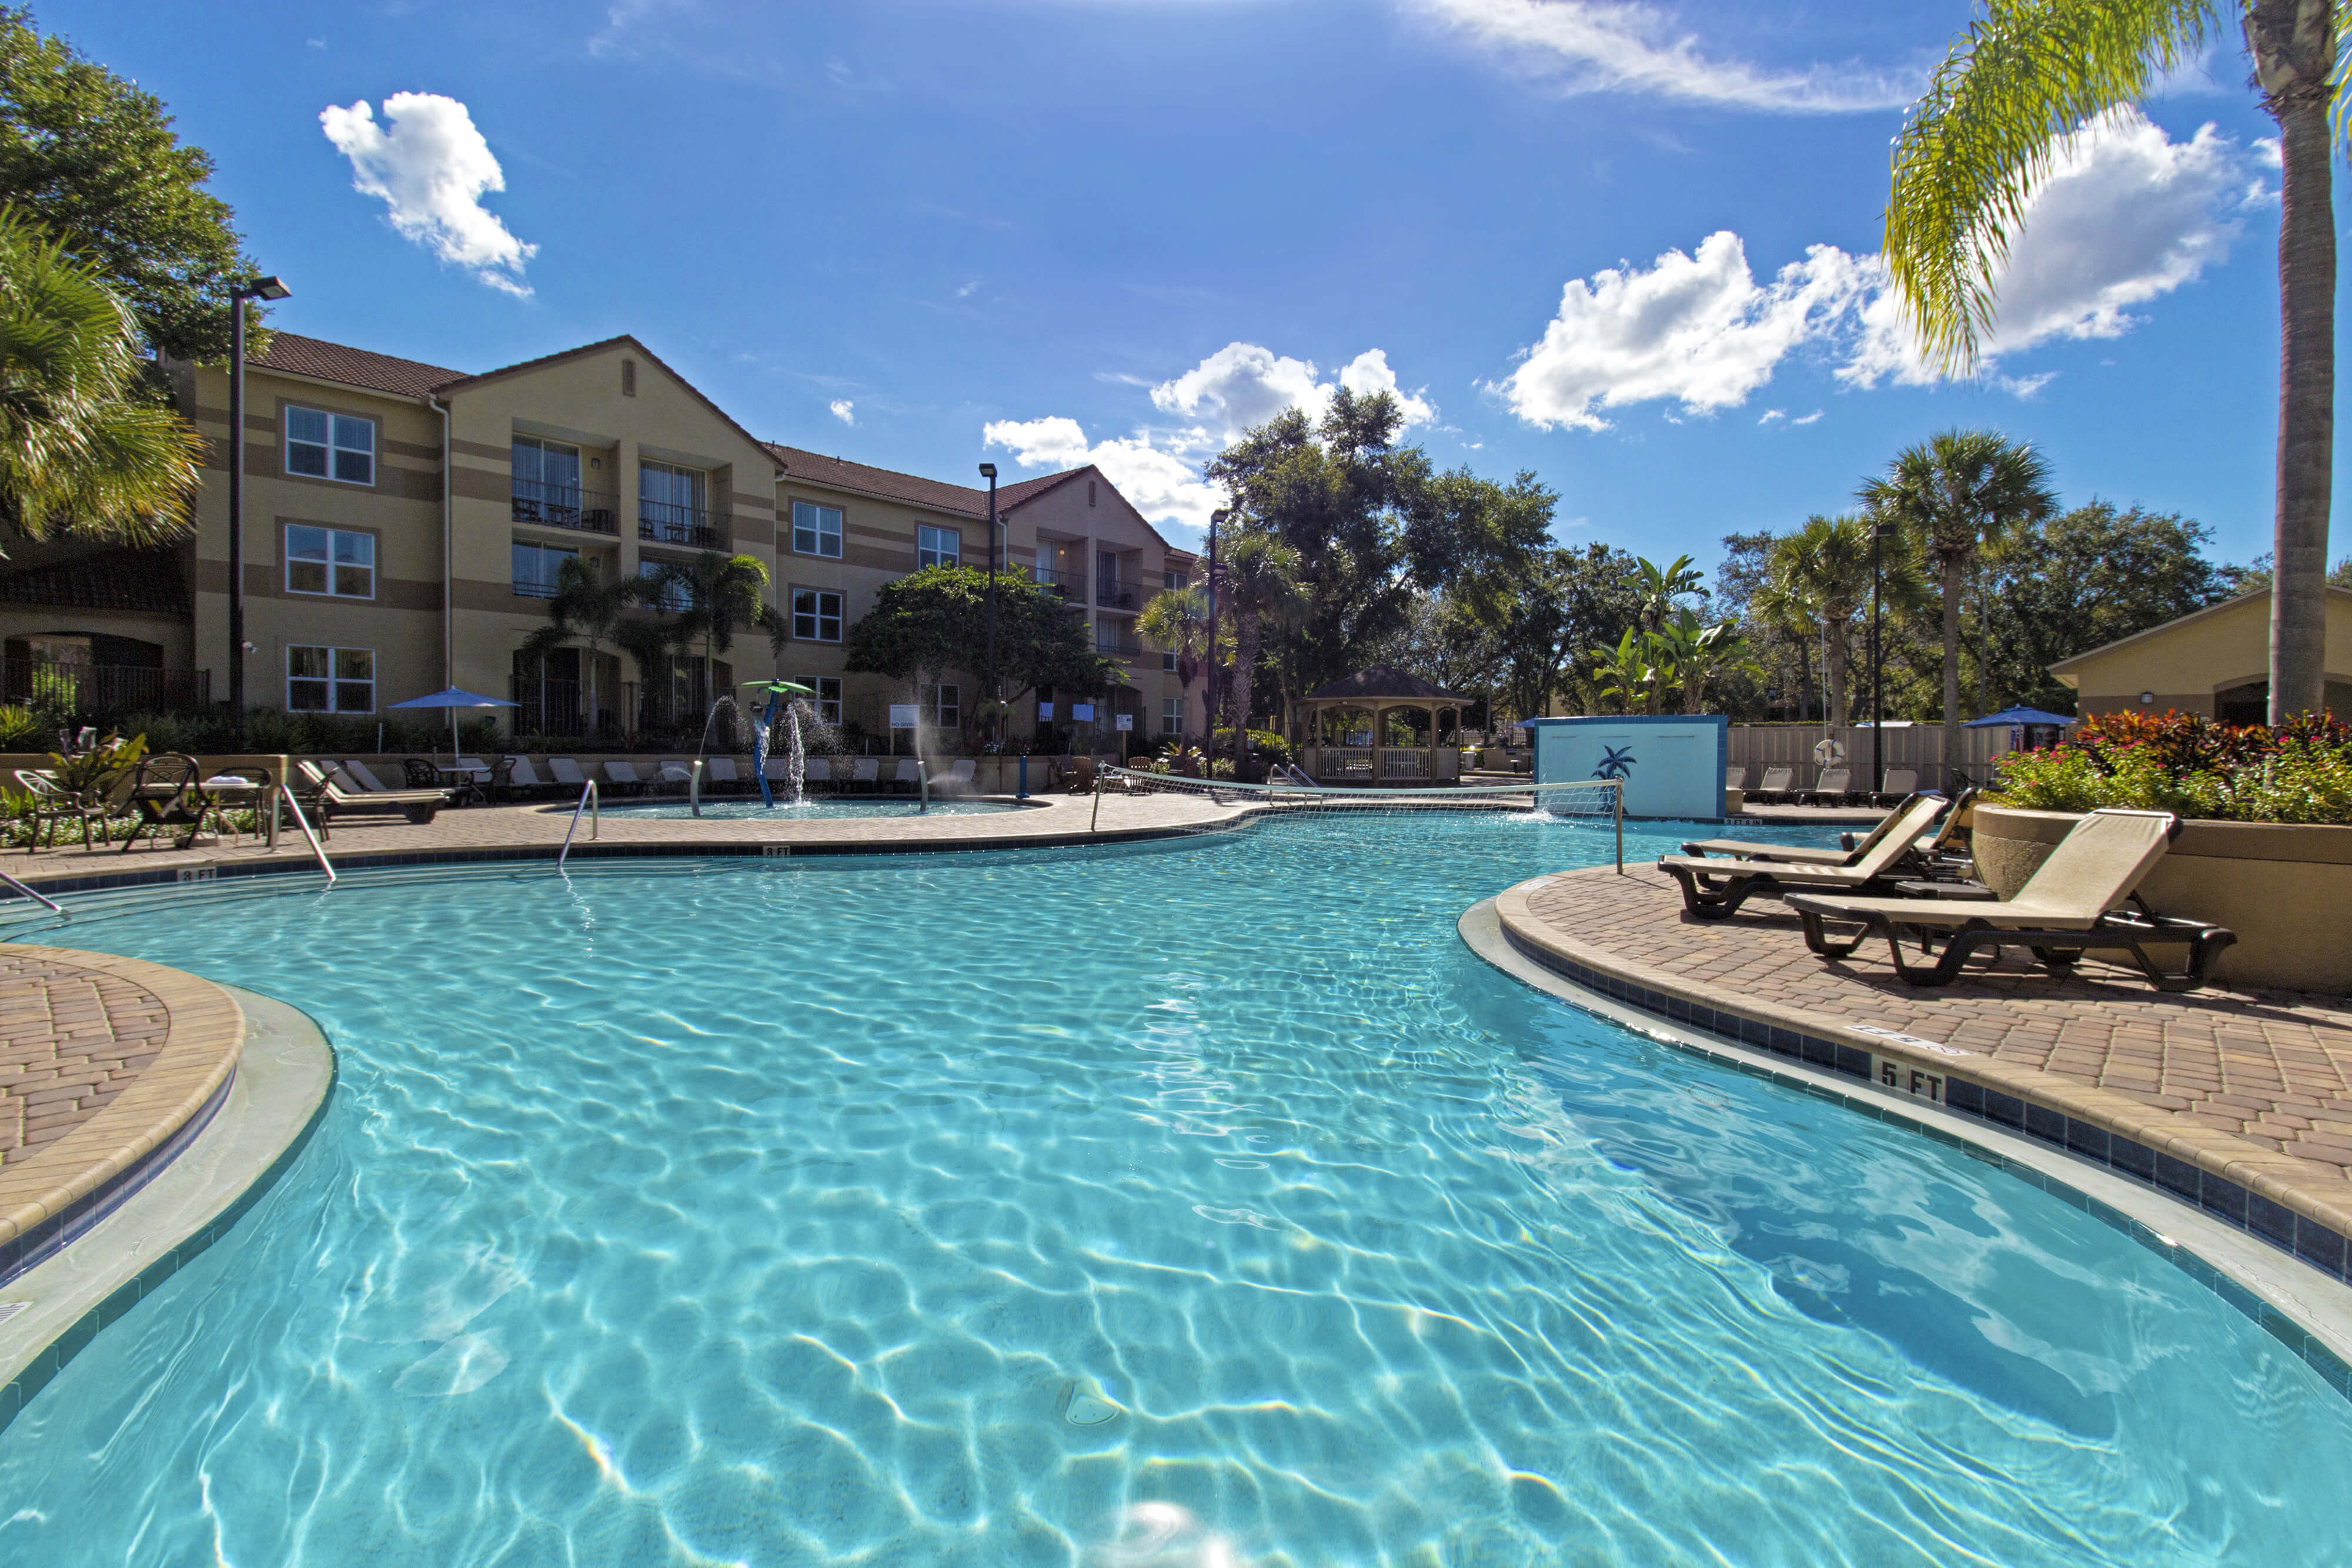 Large outdoor pool with volleyball net | Westgate Blue Tree Resort | Westgate Resorts Orlando